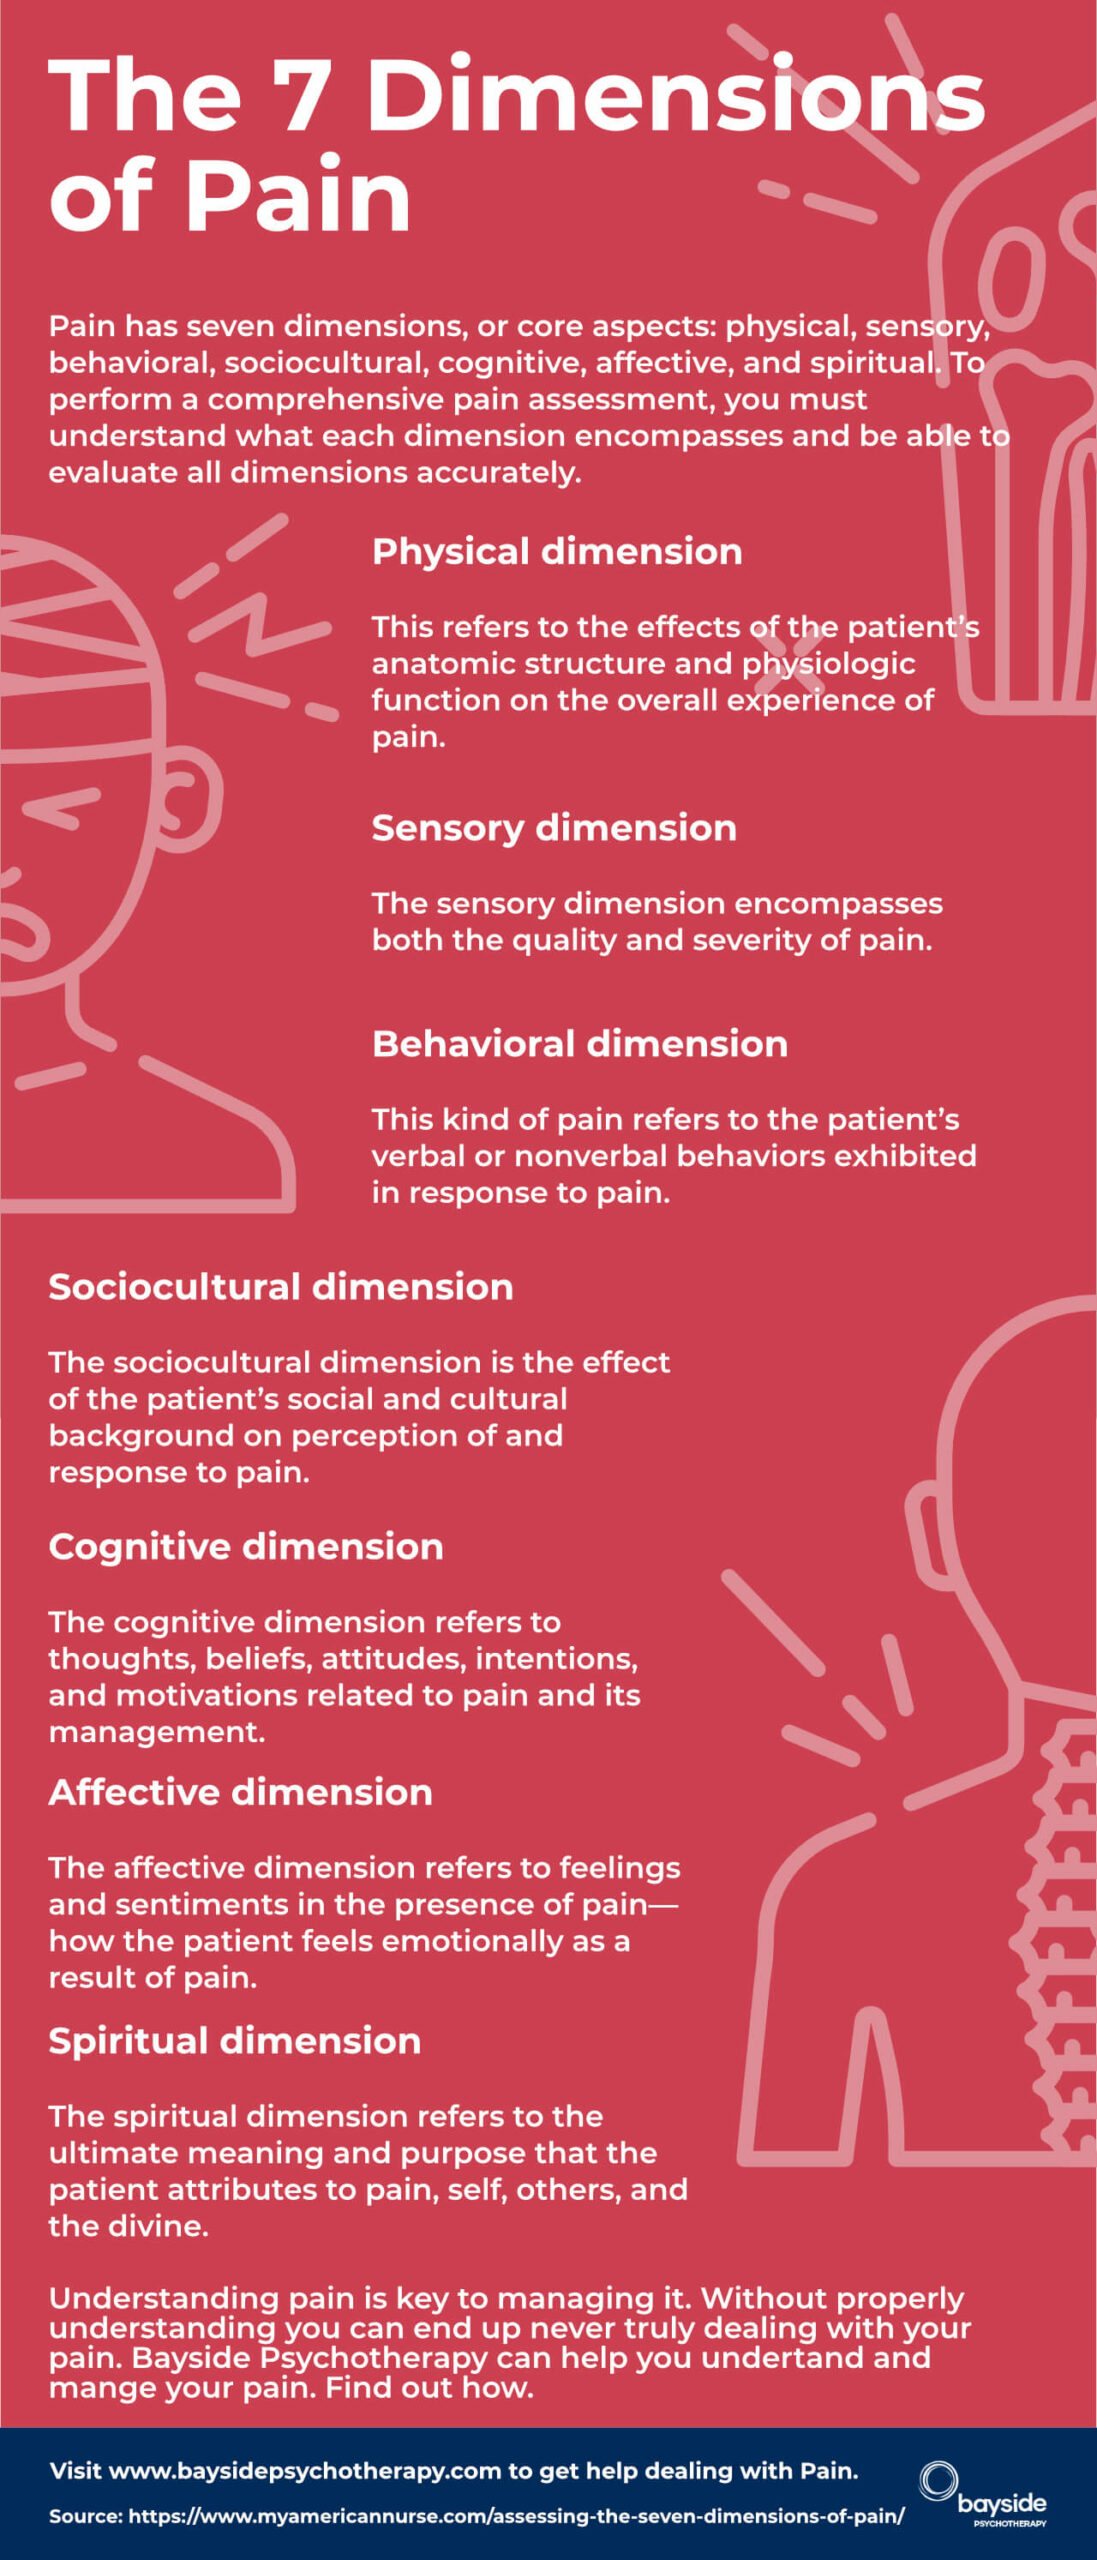 The 7 Dimensions of Pain Management - Bayside Hypnotherapy